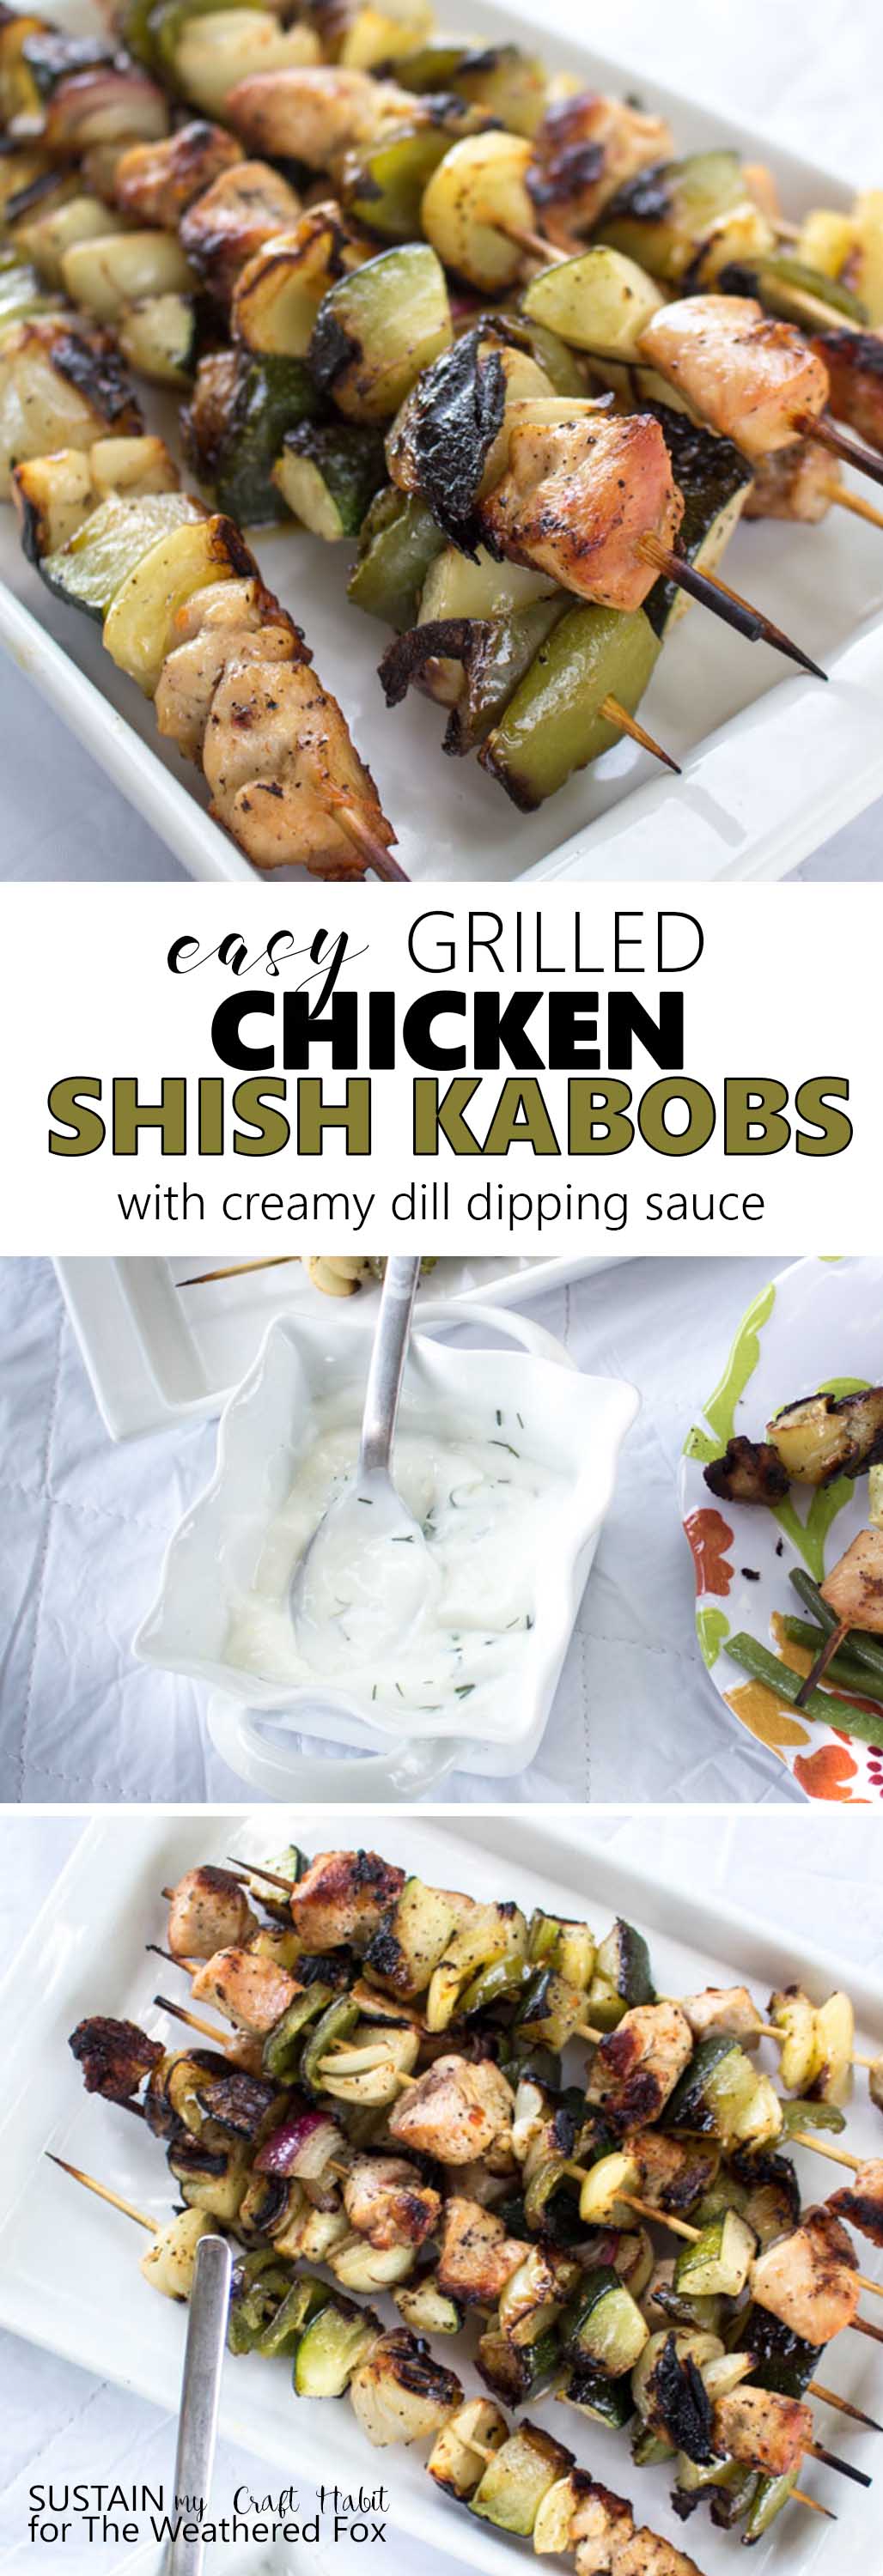 Perfect for BBQ season! Simply seasoned grilled chicken shish kabob with a creamy garlic dill dipping sauce. A low-fat, gluten-free dinner recipe idea that's perfect for entertaining.